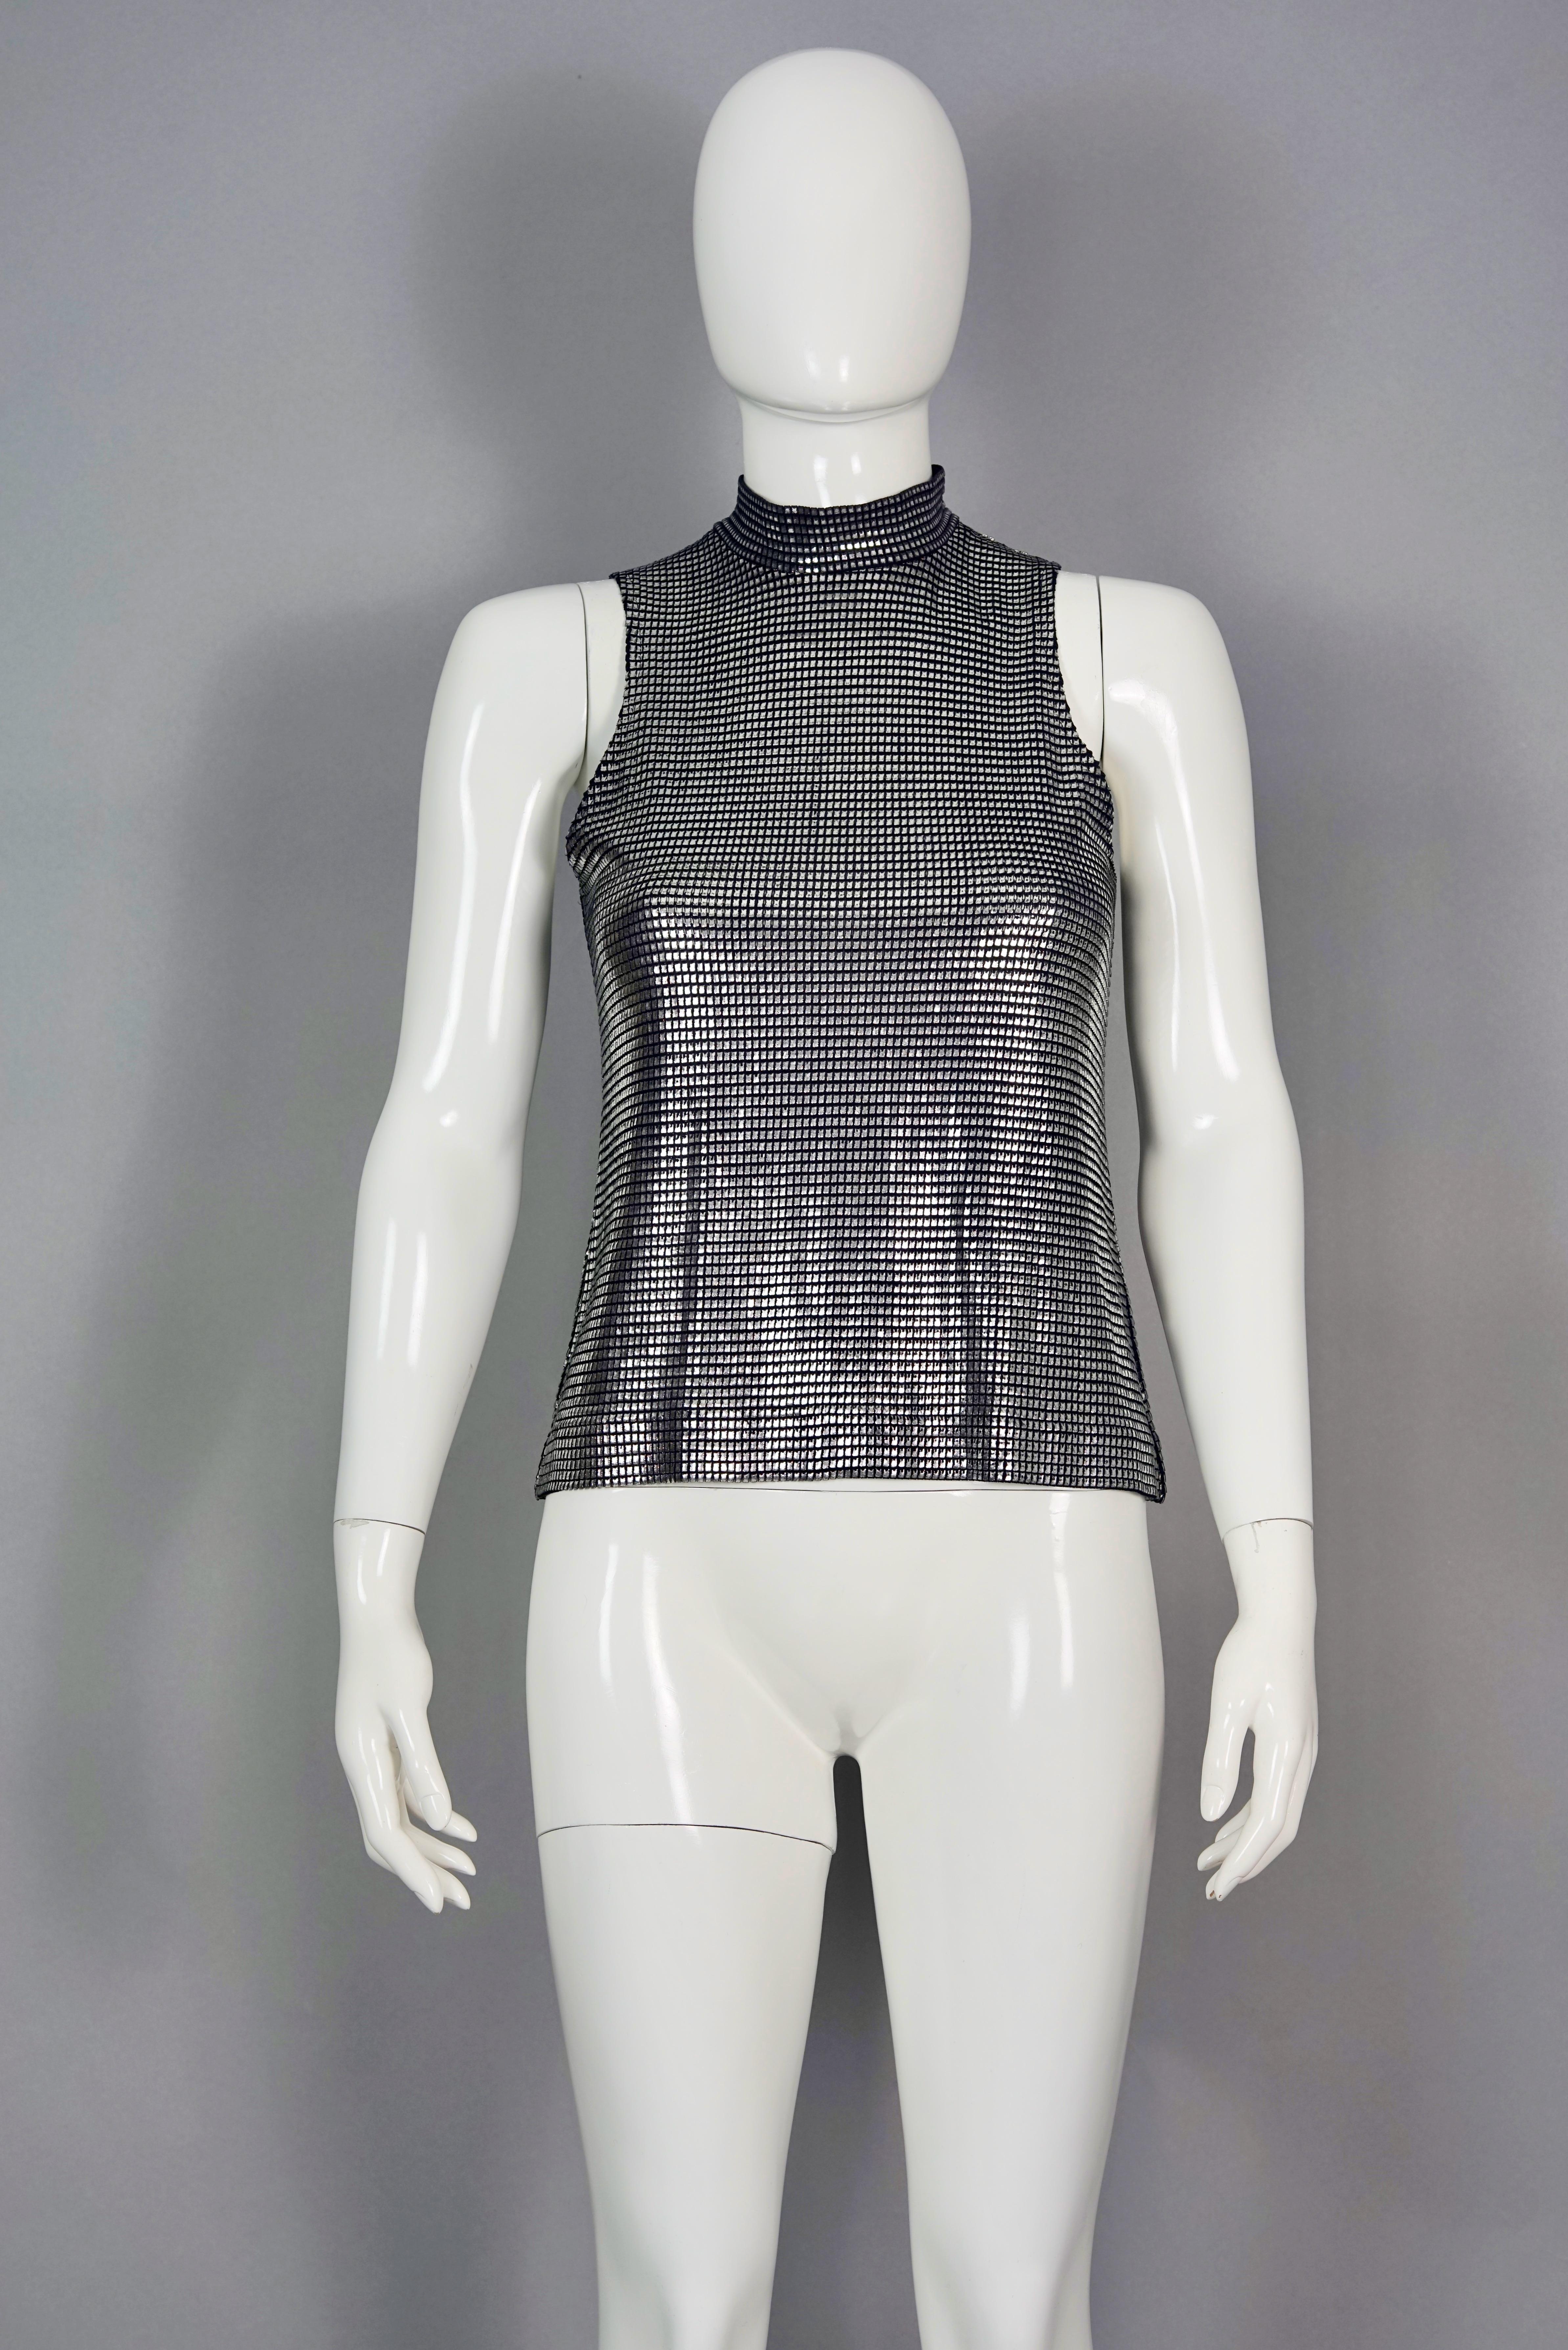 Vintage PACO RABANNE Silver Foil Mesh Sleeveless Top Blouse

Measurements taken laid flat, please double bust and waist:
Shoulder: 10.23 inches (26 cm)
Bust: 16.14 inches (41 cm) without stretching
Waist: 16.14 inches (41 cm) without